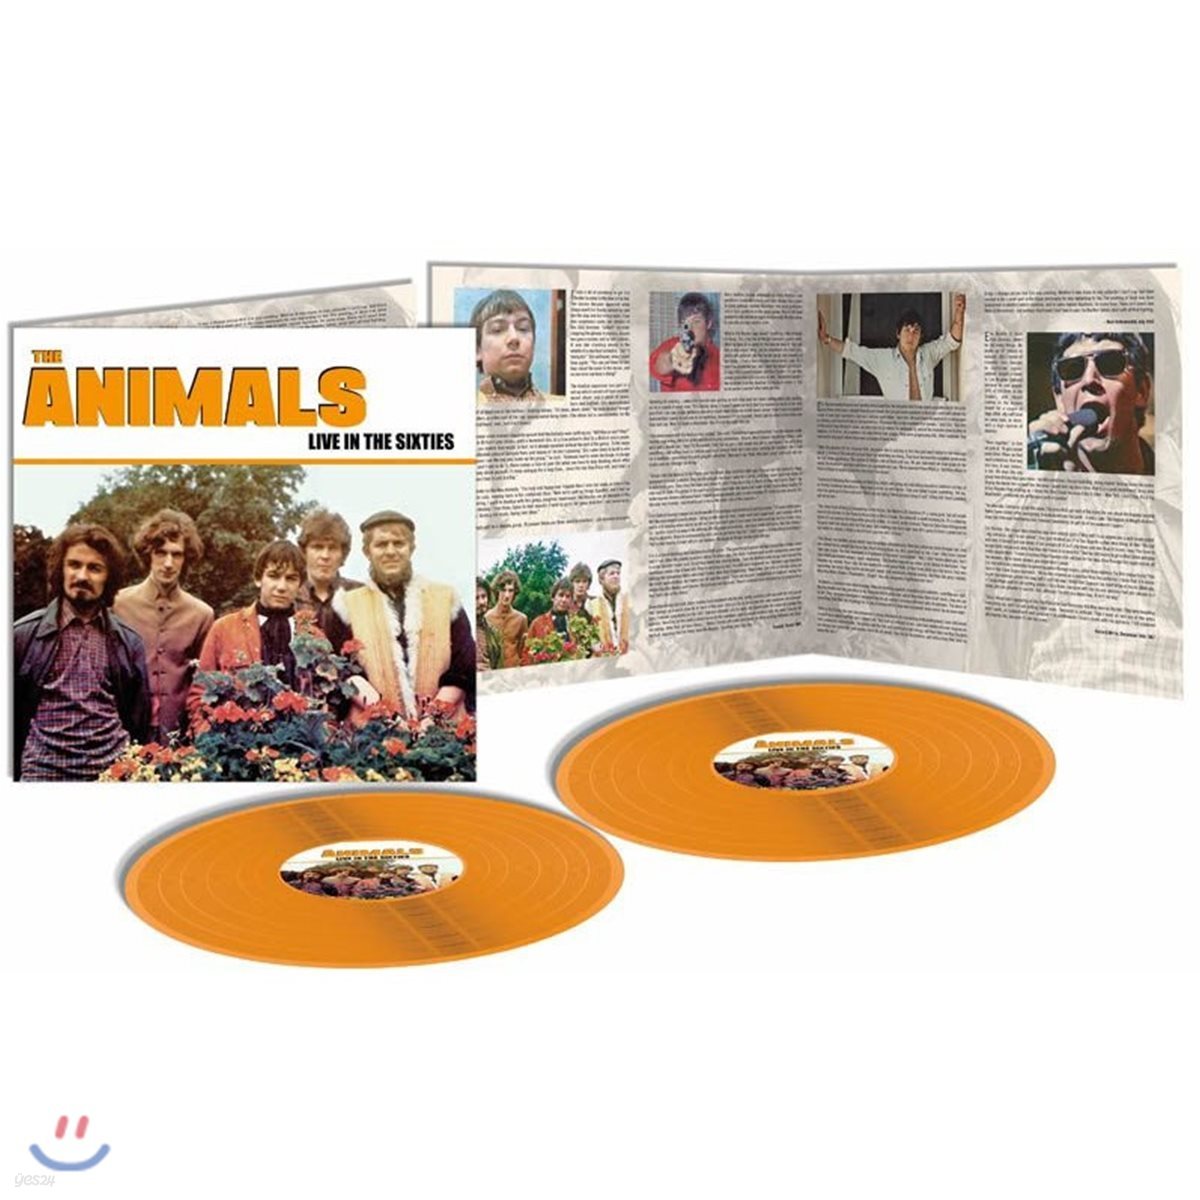 The Animals - Live In The Sixties 애니멀즈 1966-1967 라이브 실황 [오렌지 컬러 2 LP]